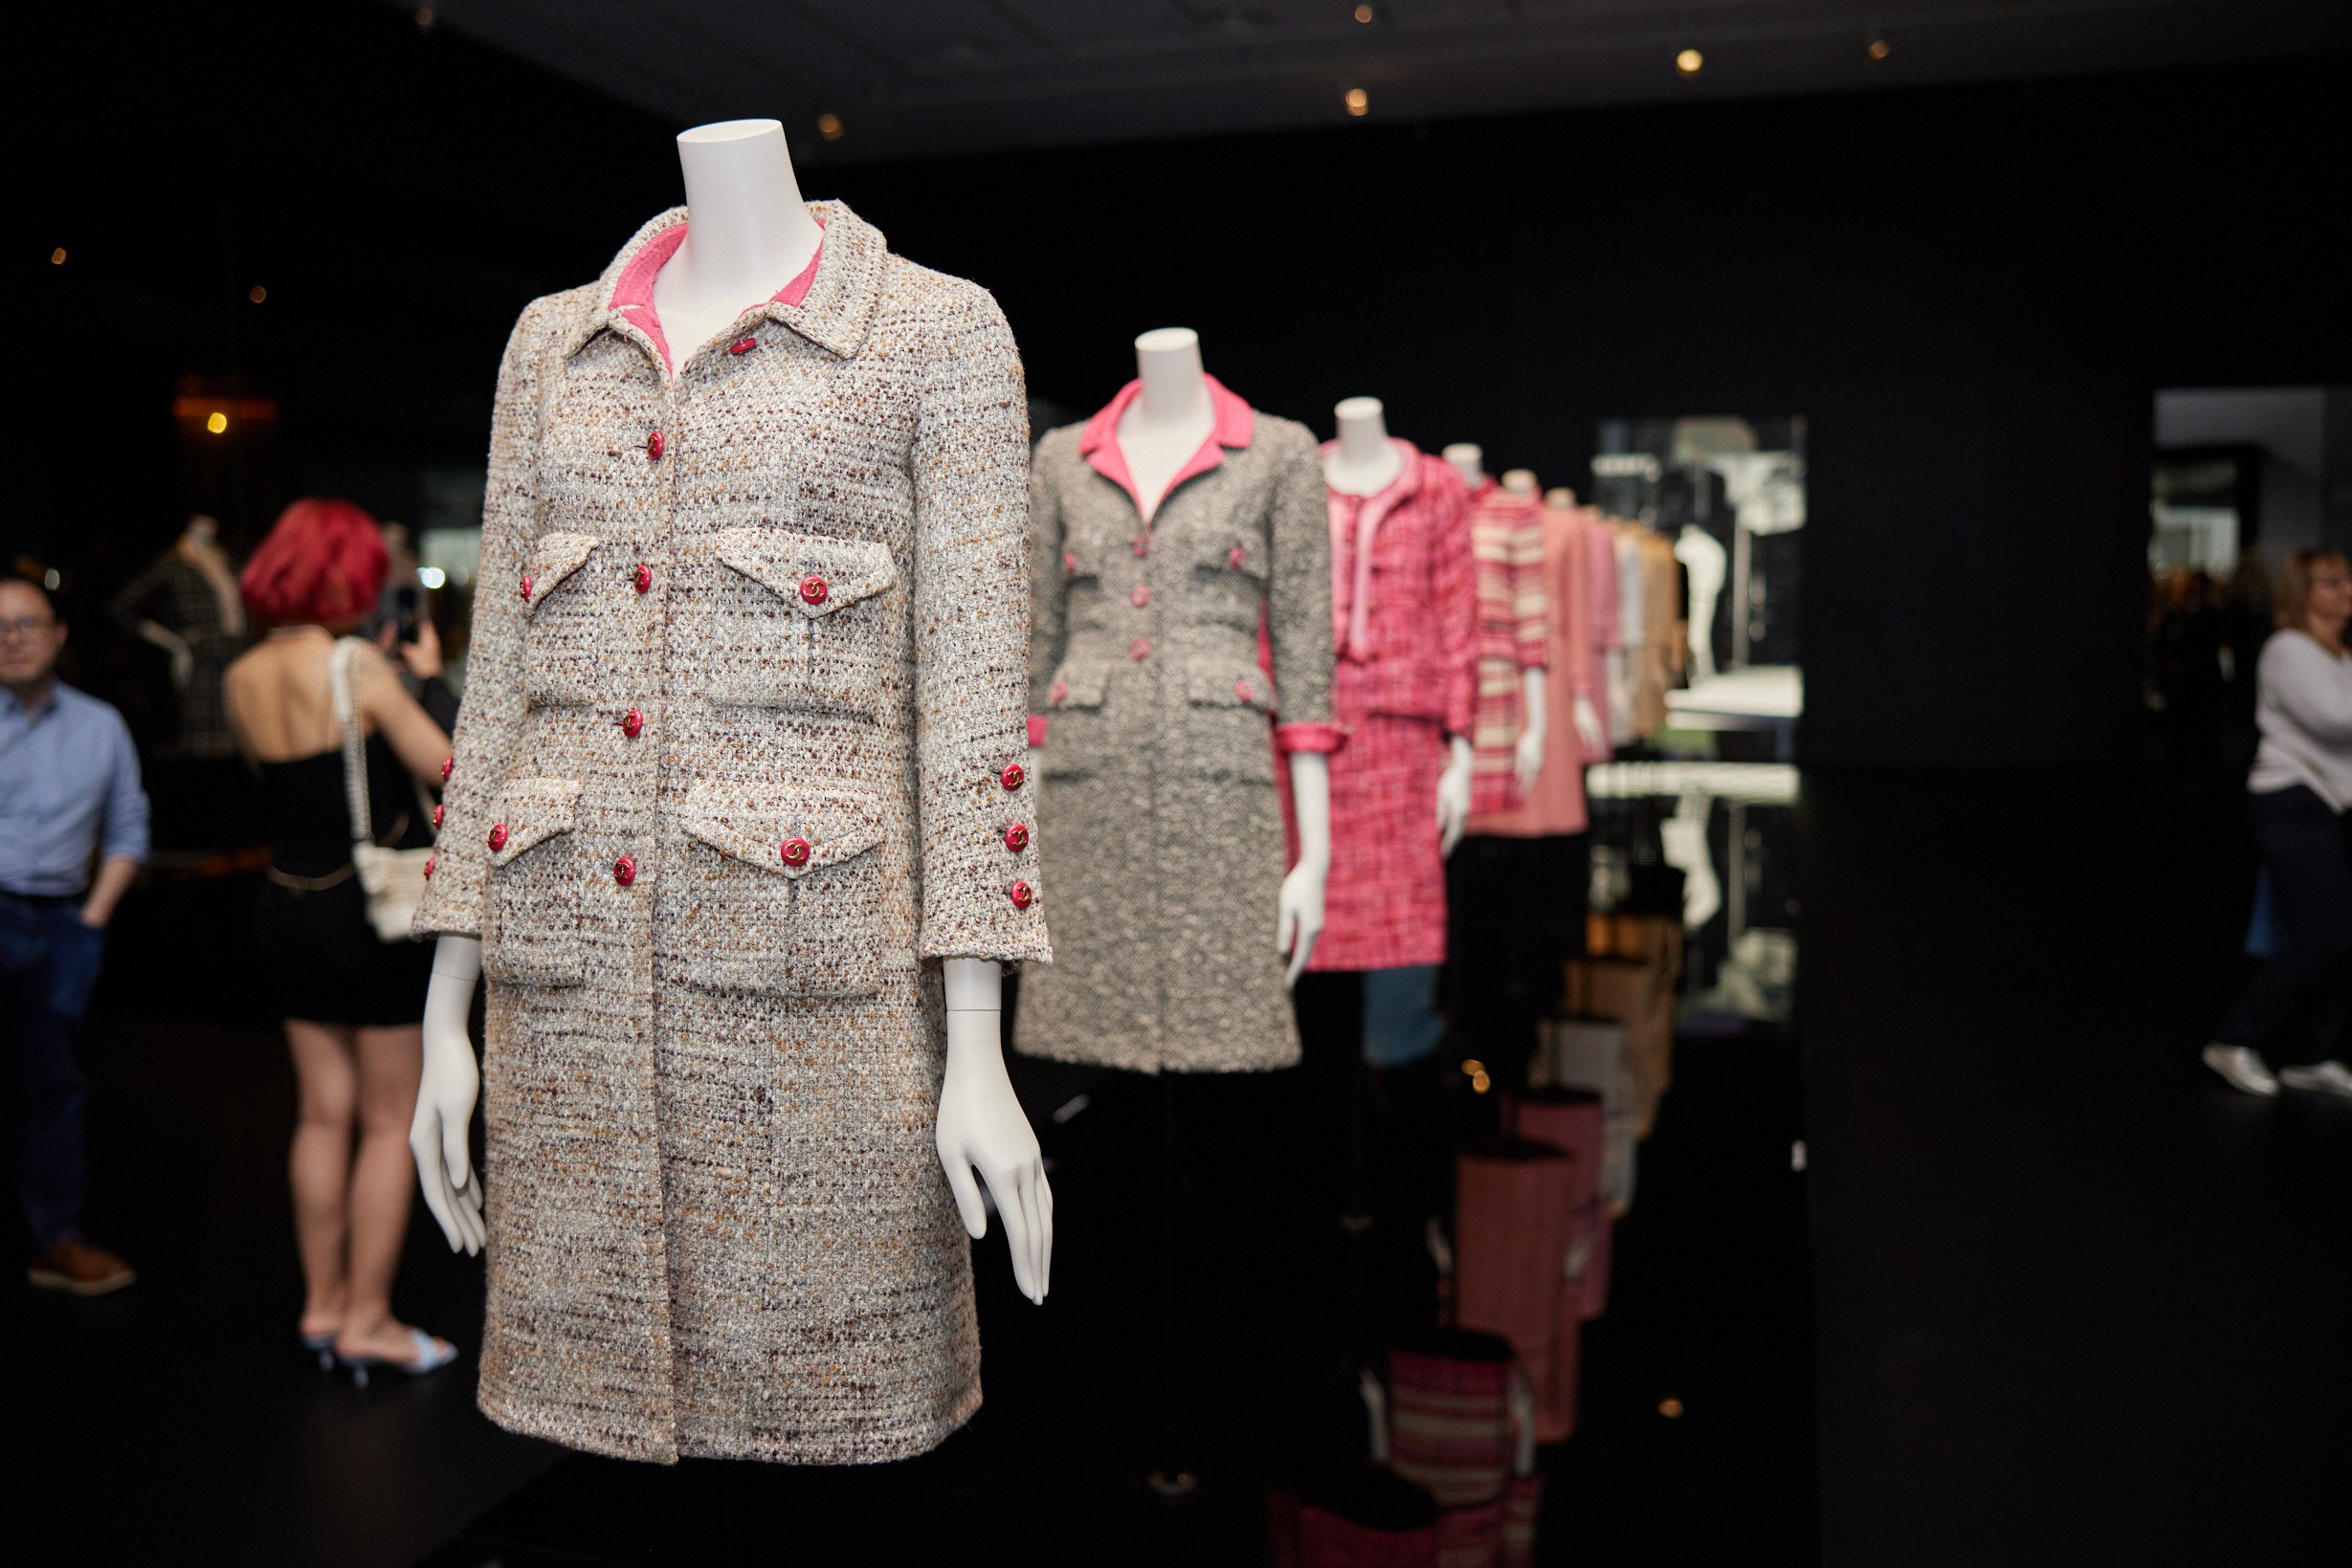 Inside Chanel's major upcoming exhibition at the V&A Museum in